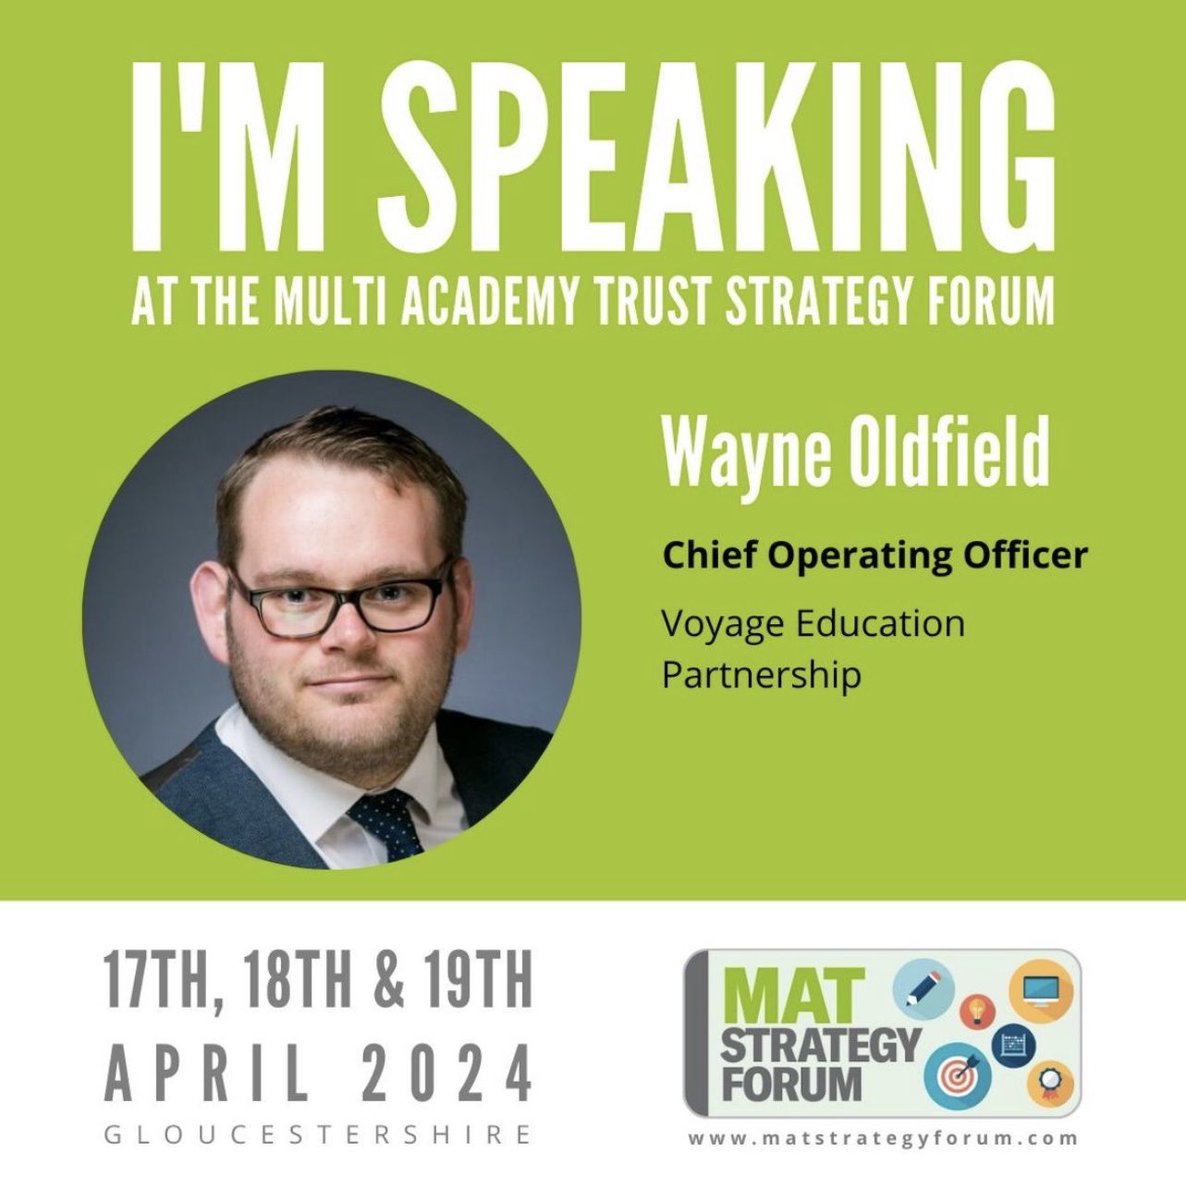 Exciting Announcement 📣 

Our COO @woldfieldFCMI is speaking at The @MATStratForum later this week.
 
Wayne is talking about innovative solutions to improve operational efficiencies @VoyageEP 

#TeamVoyage #Sharing #ComeAndSayHello